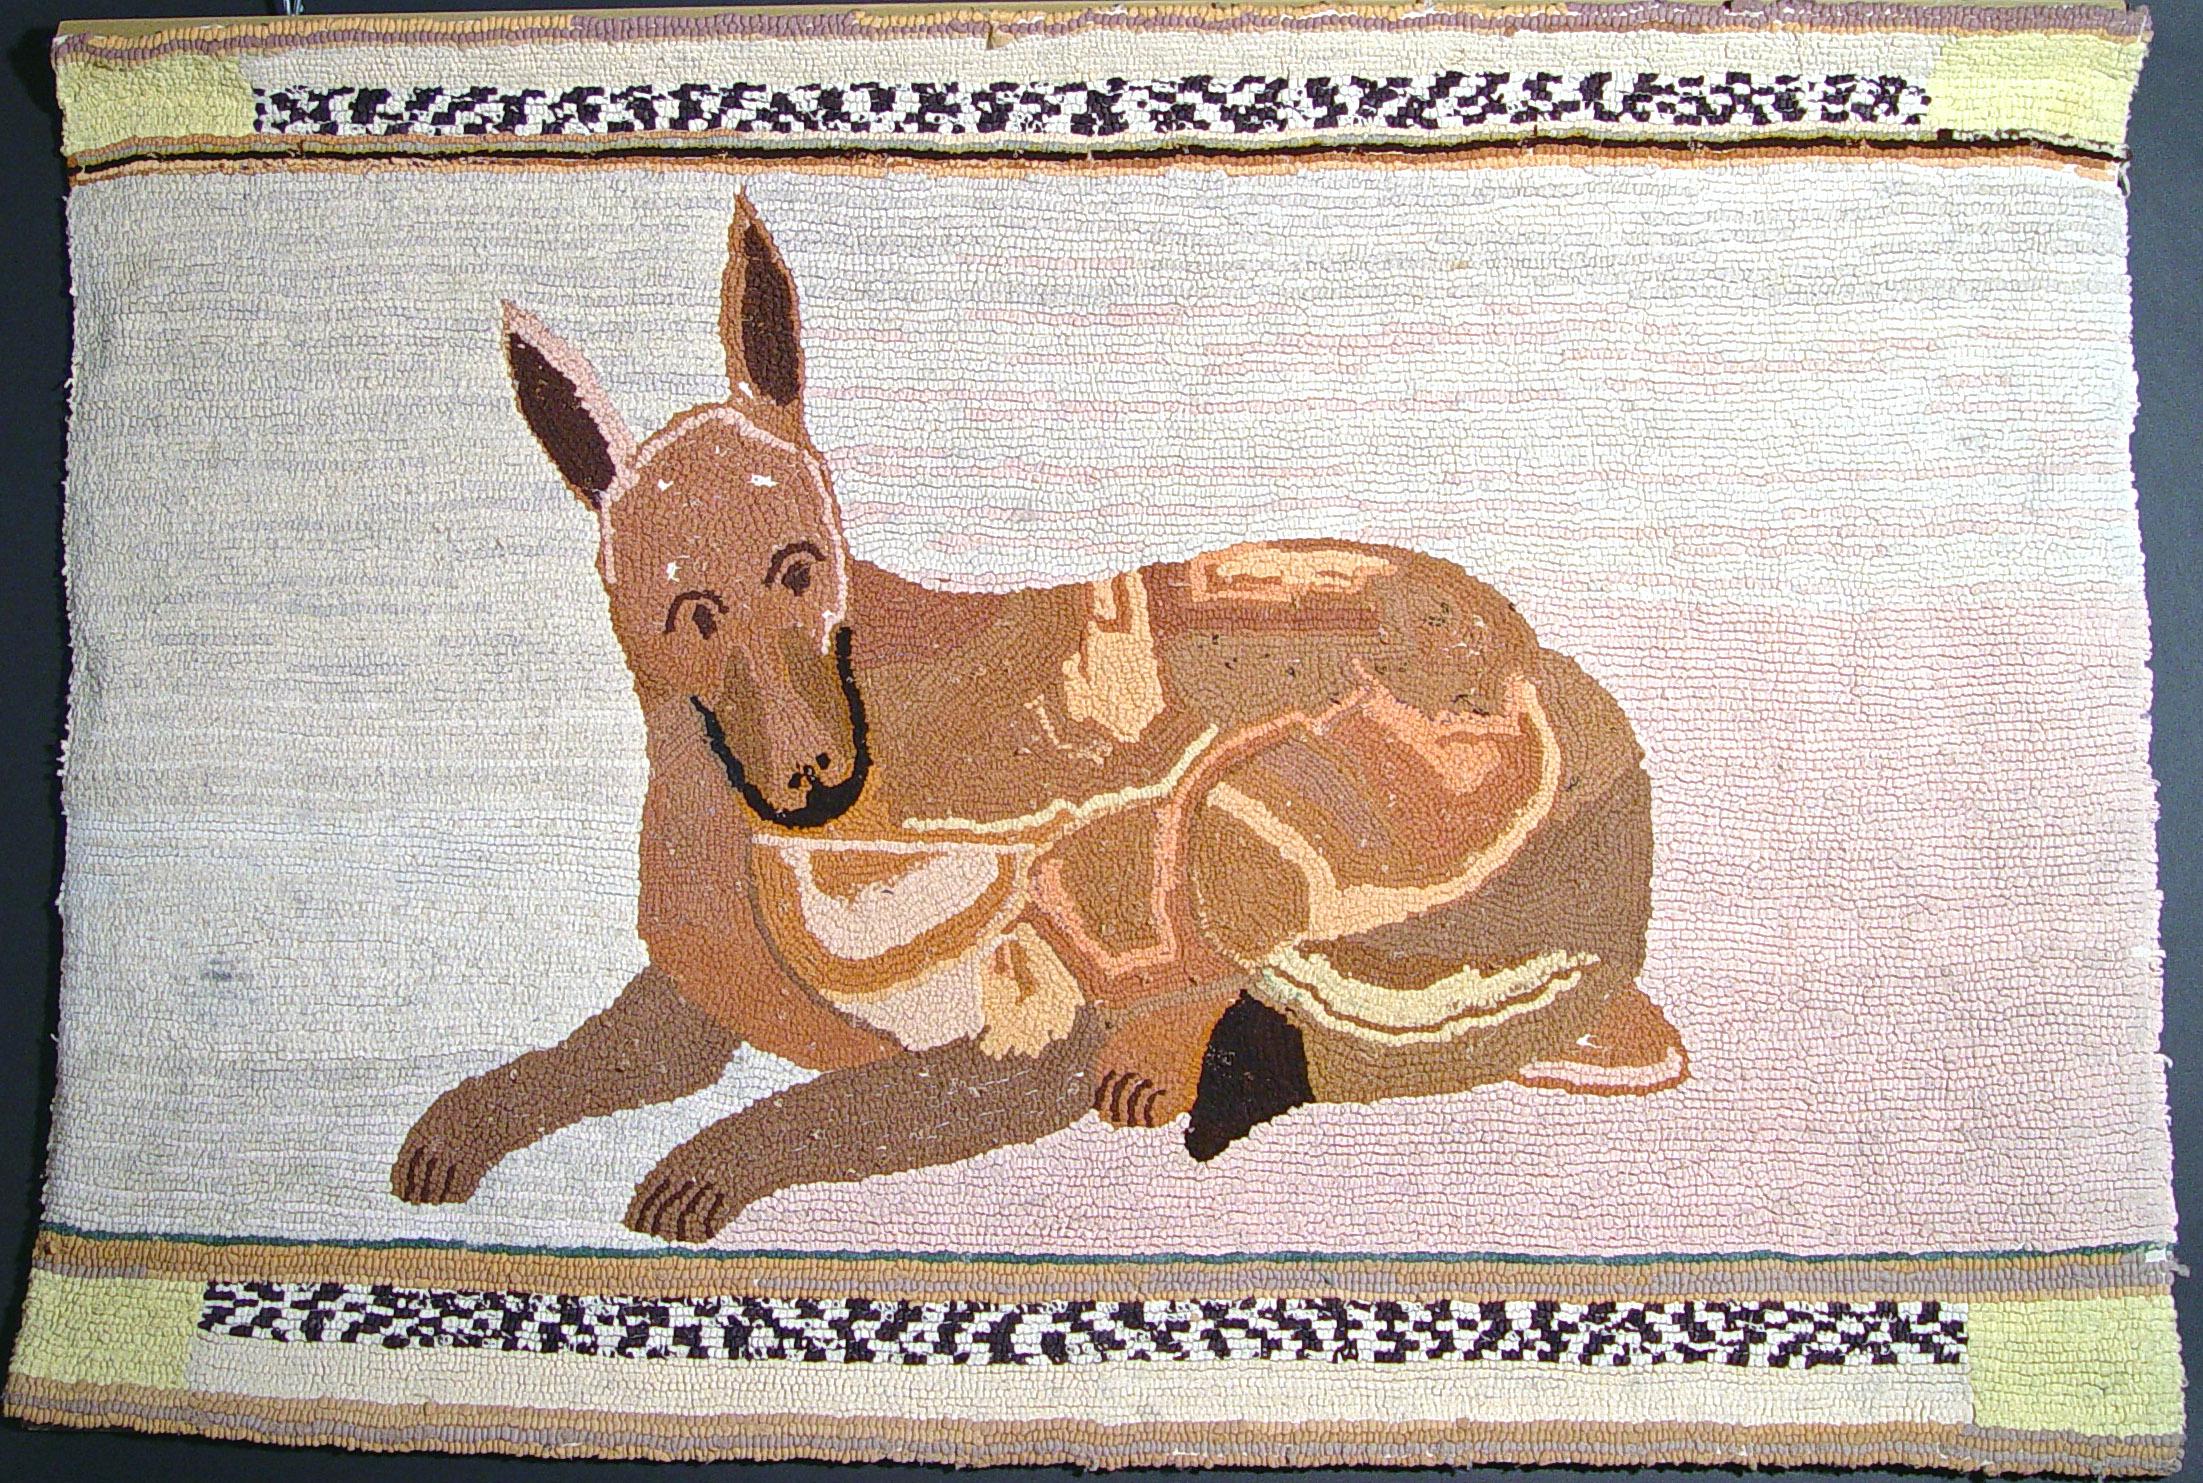 American Hooked Rug is possibly Vermont, 
circa 1890-1920

The charming and whimsical hooked rug is decorated with a large whimsical dog and is now mounted at the top rear to hang.

  